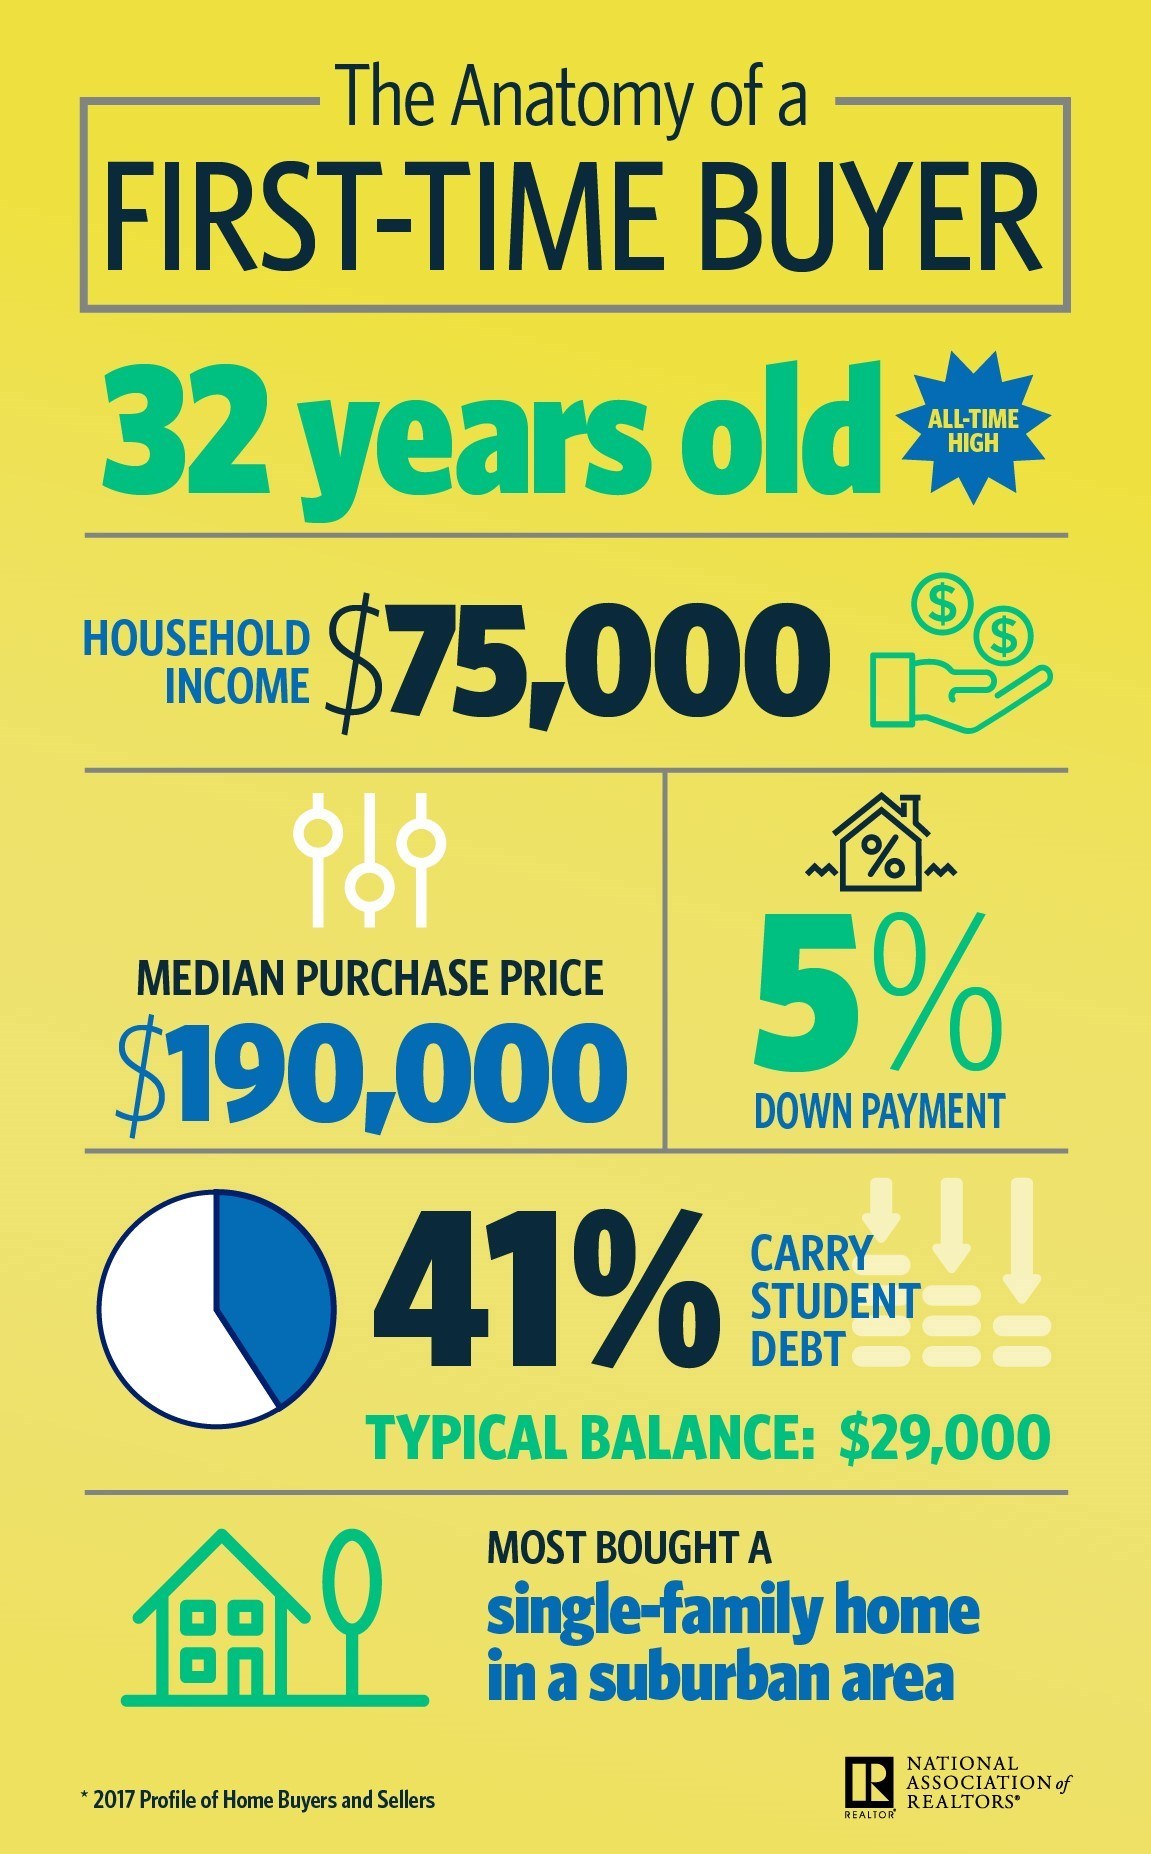 infographic-breaking-down-first-time-buyer-data-rismedia-s-housecall